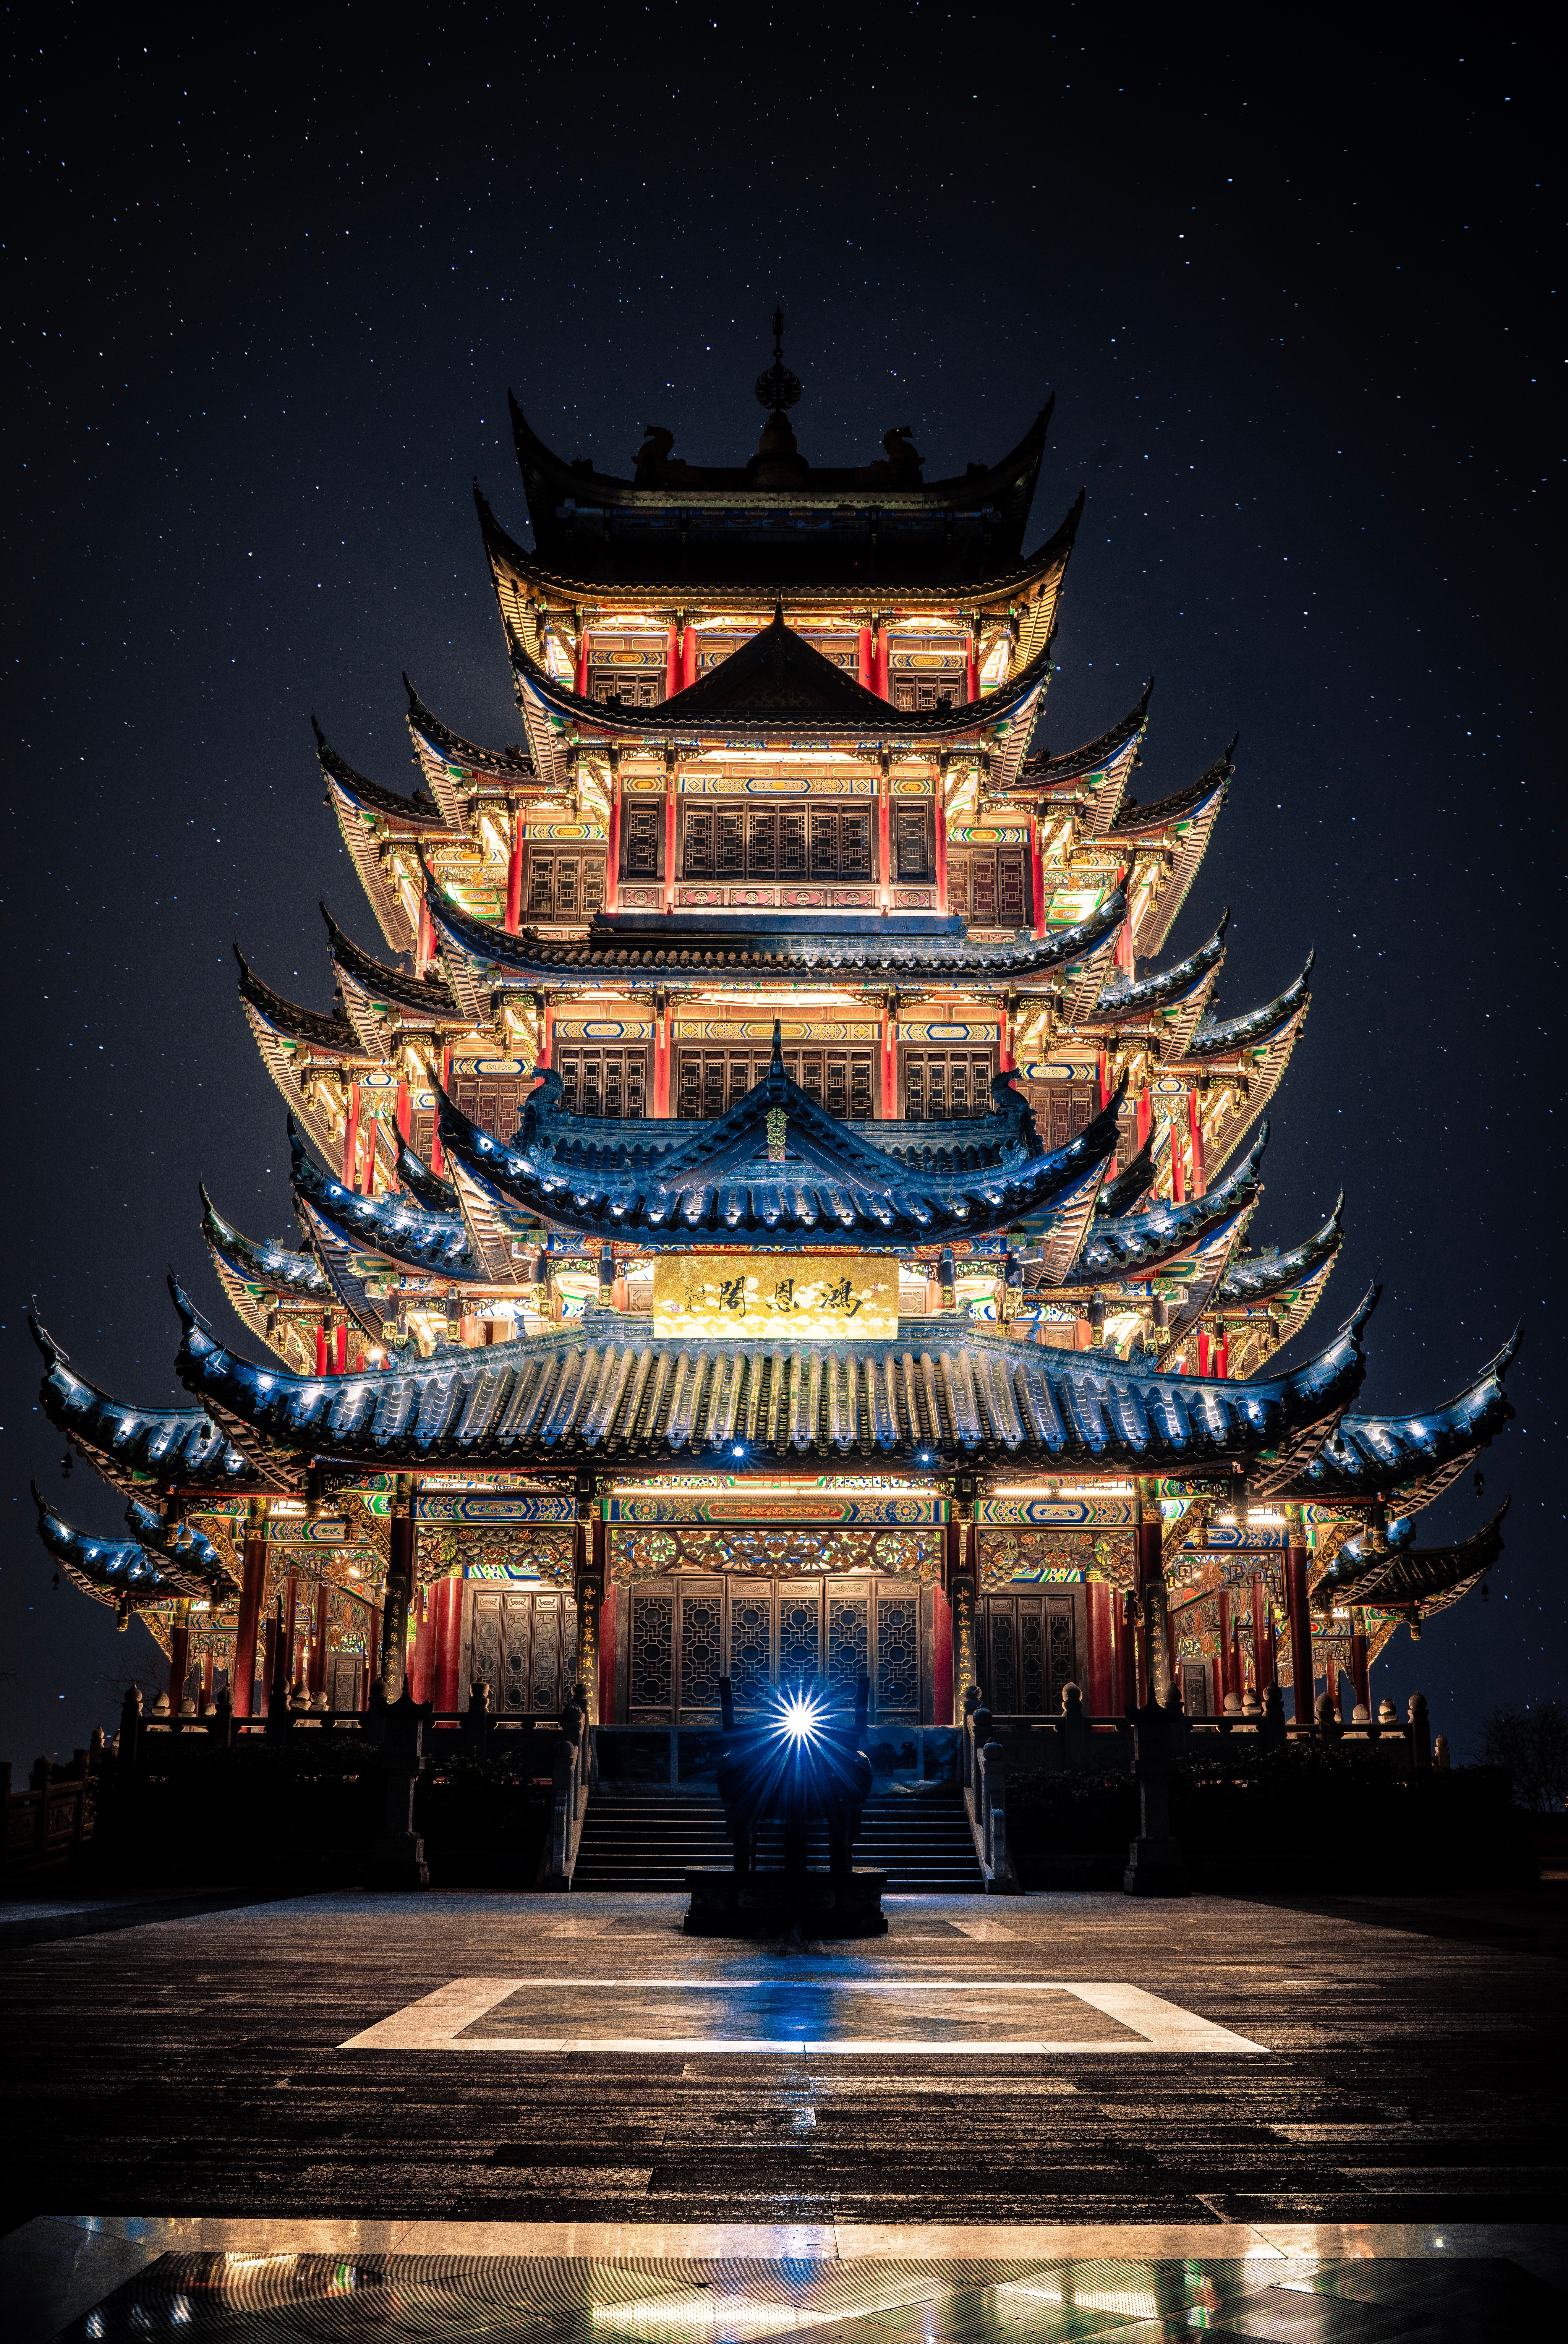 149258 free wallpaper 320x480 for phone, download images building, architecture, pagoda, oriental 320x480 for mobile